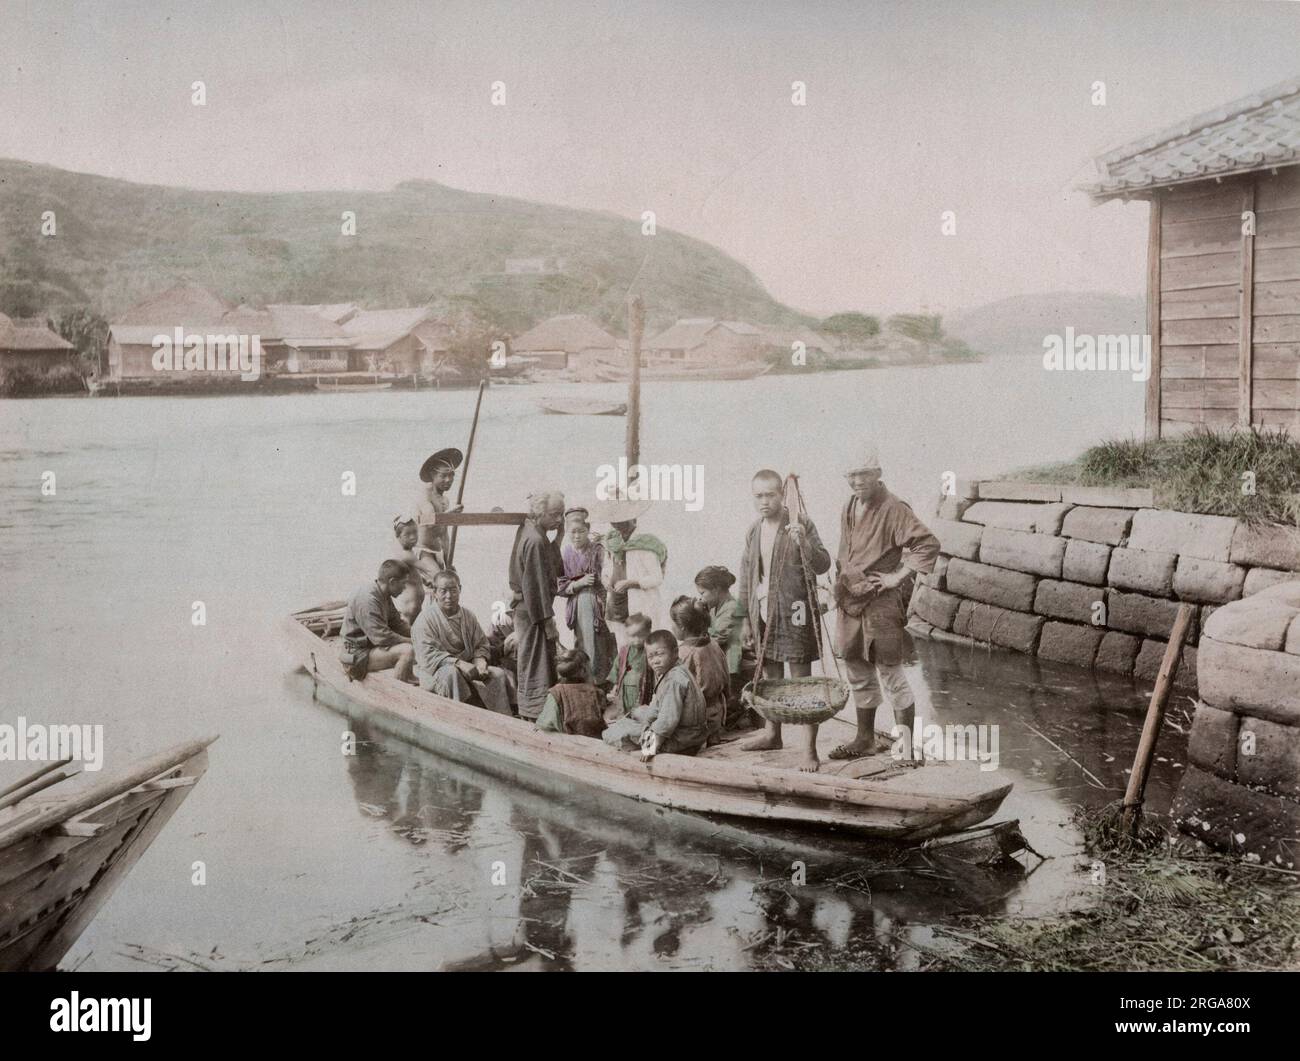 Passengers on a ferry boat, Japan. Vintage 19th century photograph. Stock Photo